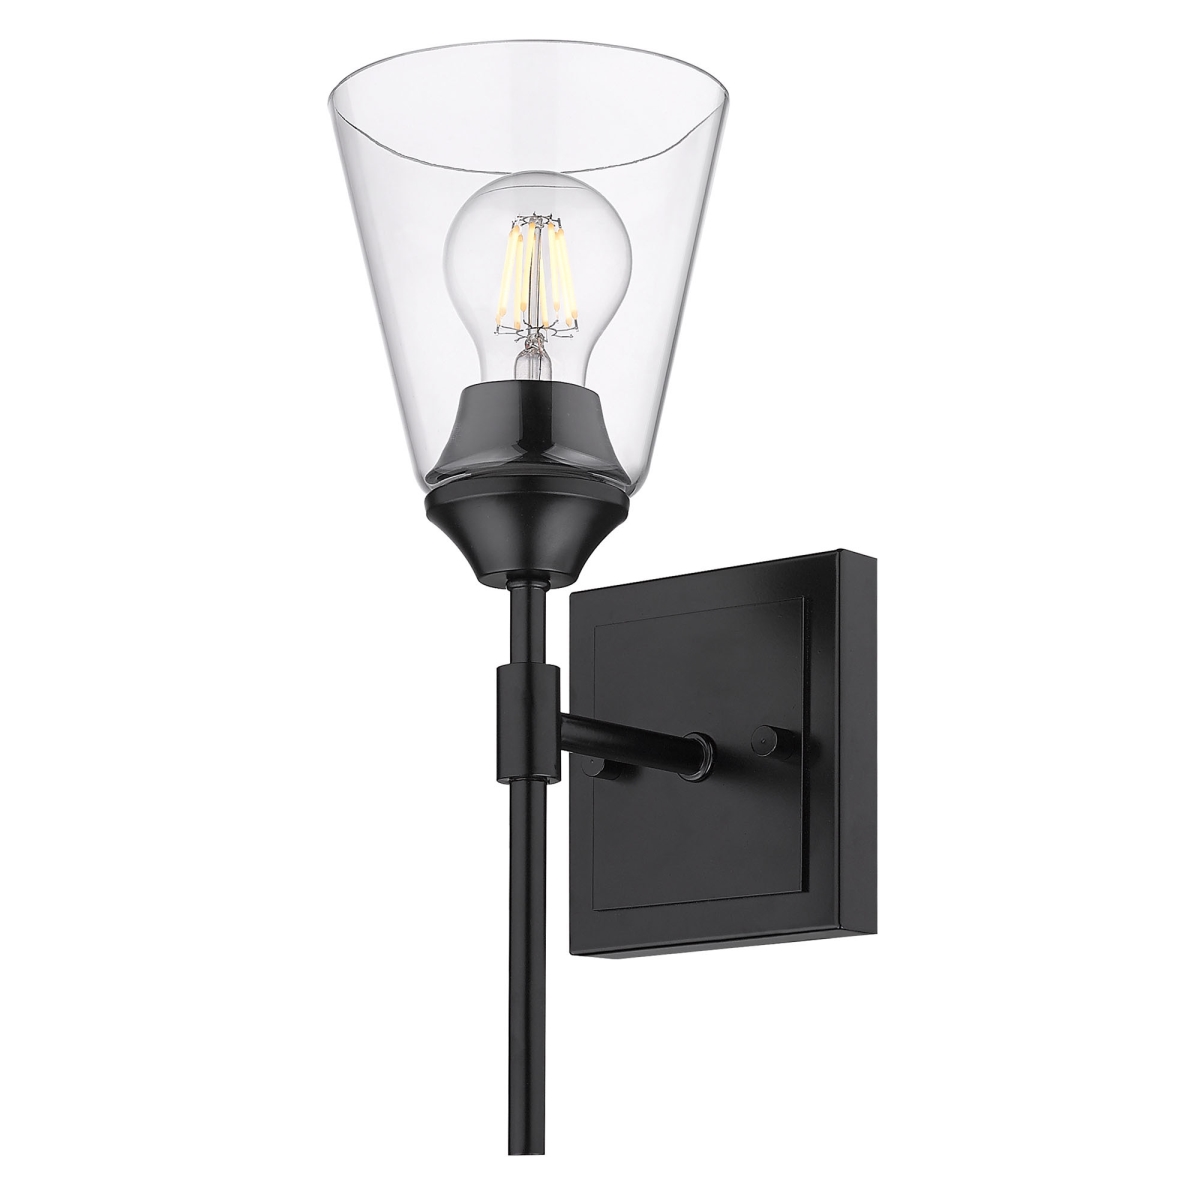 2120-ba1 Blk-cone-clr Ormond 1 Light Bath Vanity In Black With Conical Clear Glass Shade